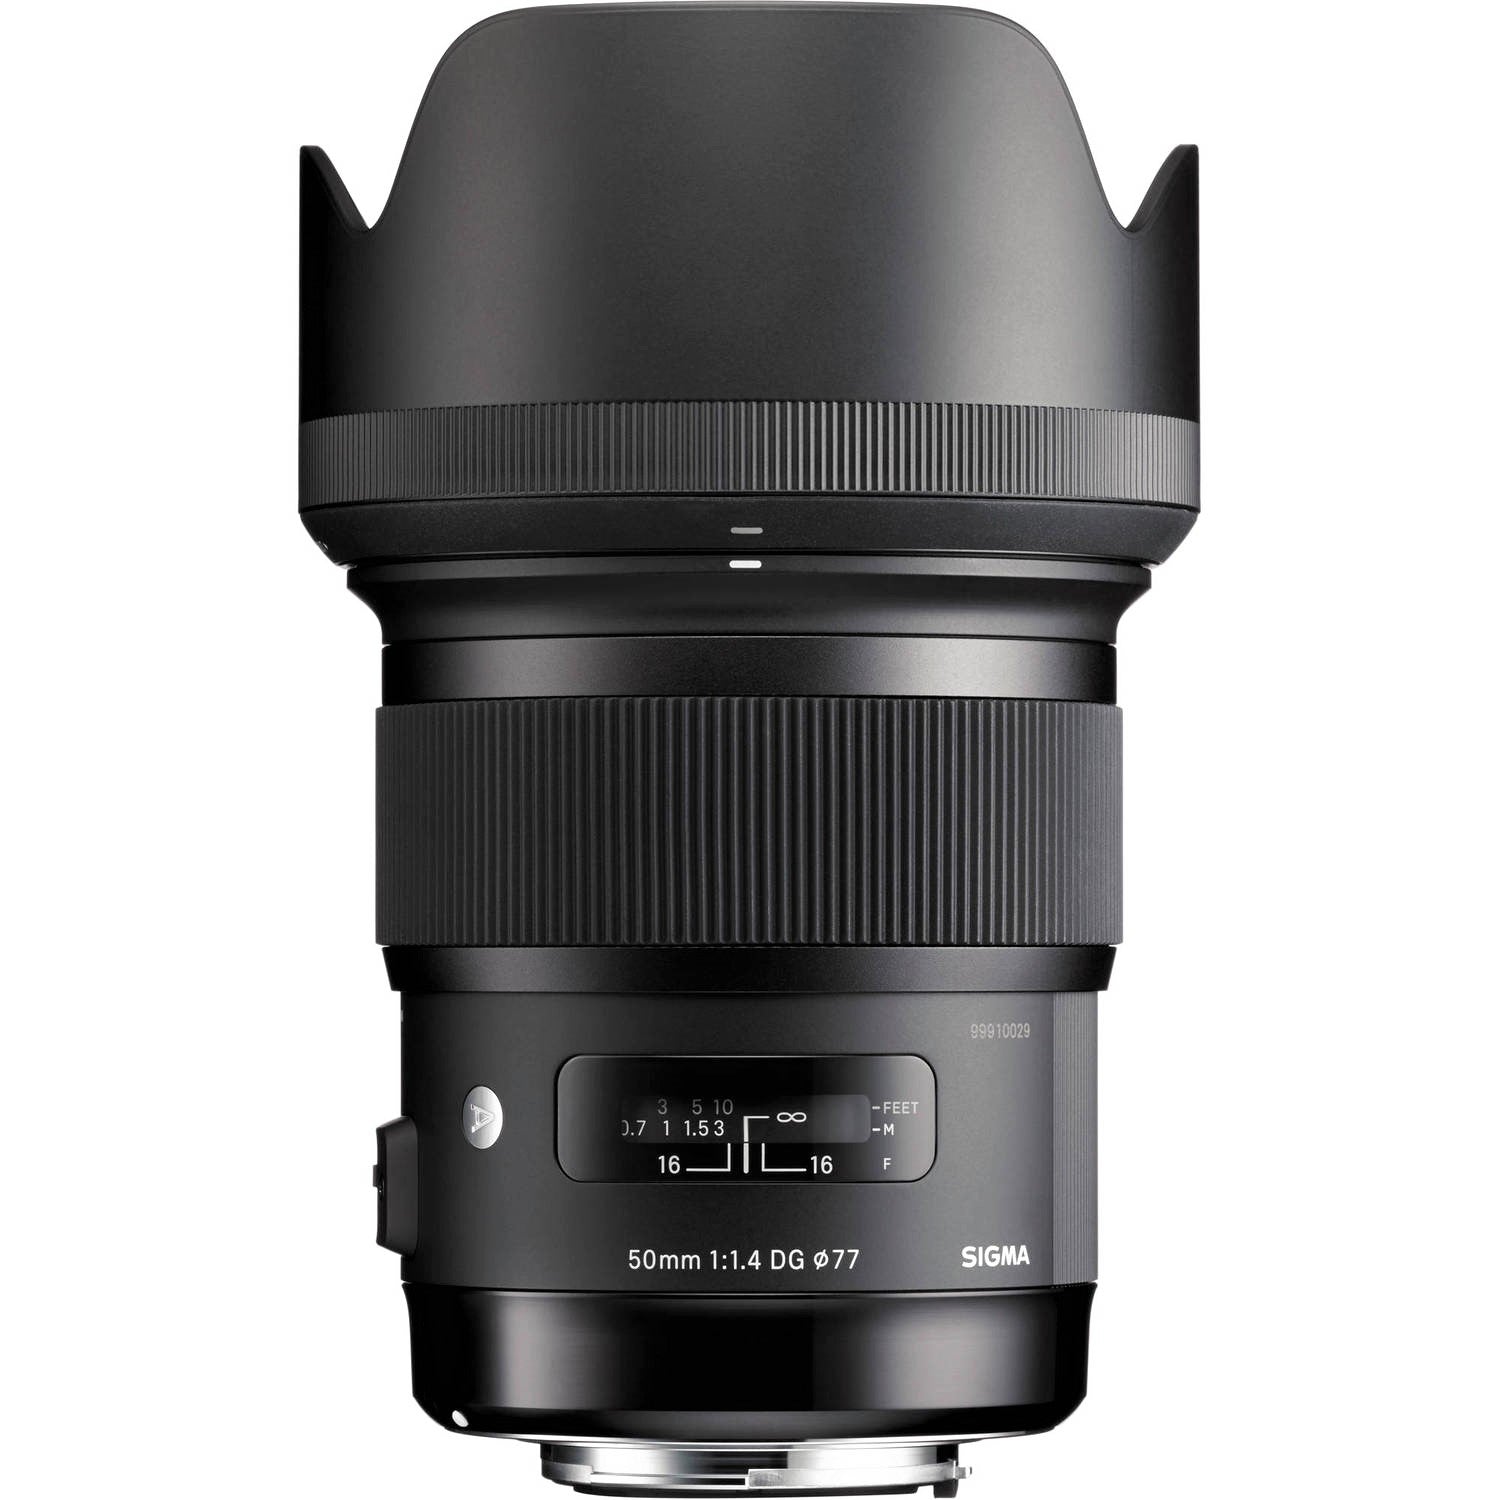 Sigma 50mm F1.4 DG HSM Art Lens for Sigma SA with Attached Lens Hood on the Top